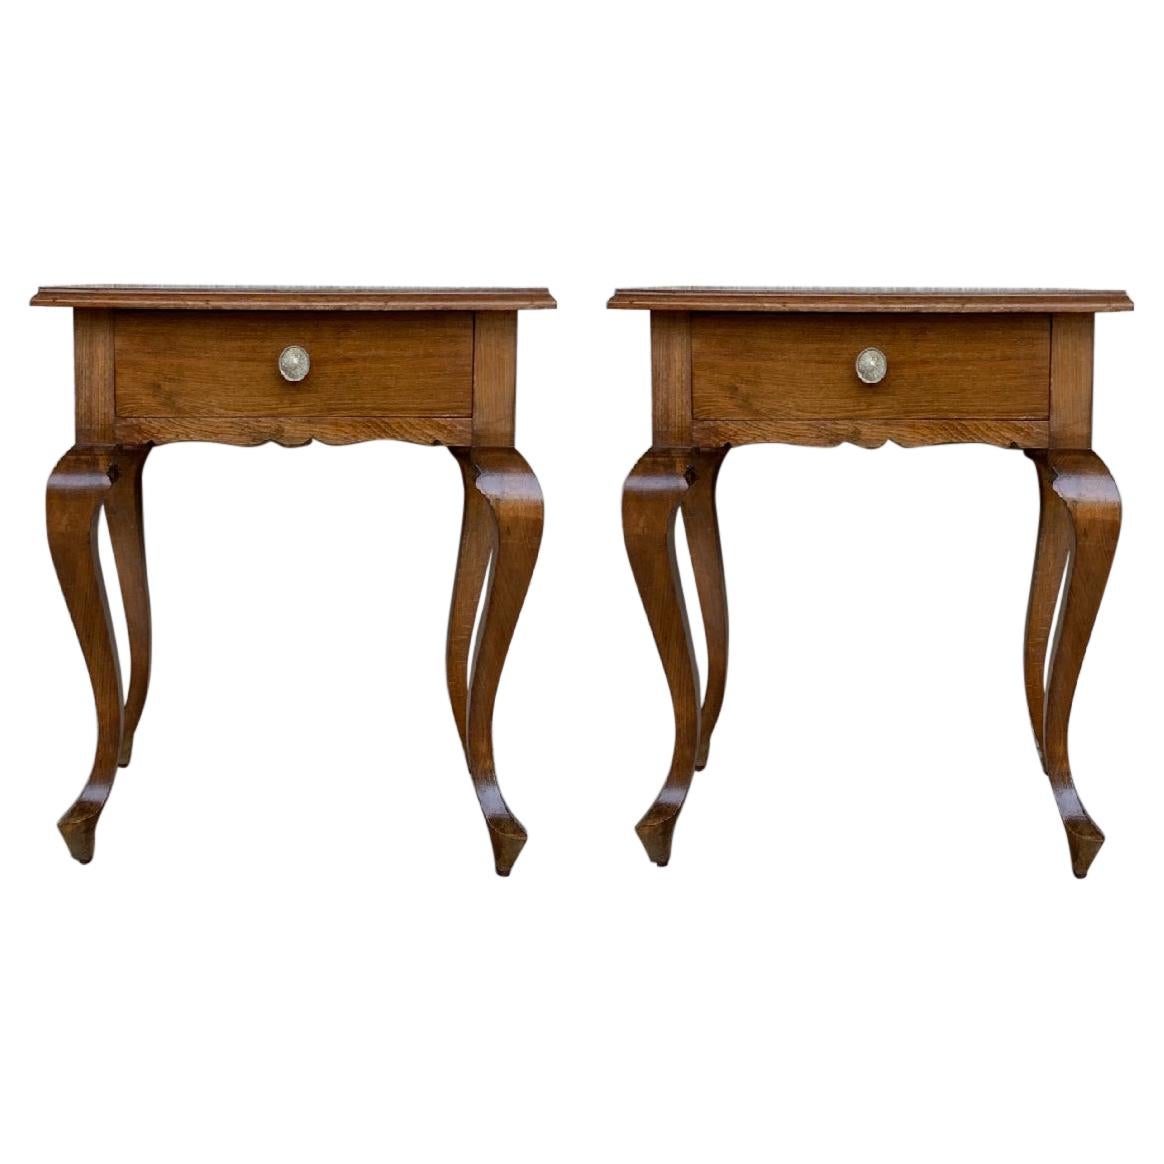 20th Century Pair of Spanish Nightstands with Two Drawers and Iron Hardware